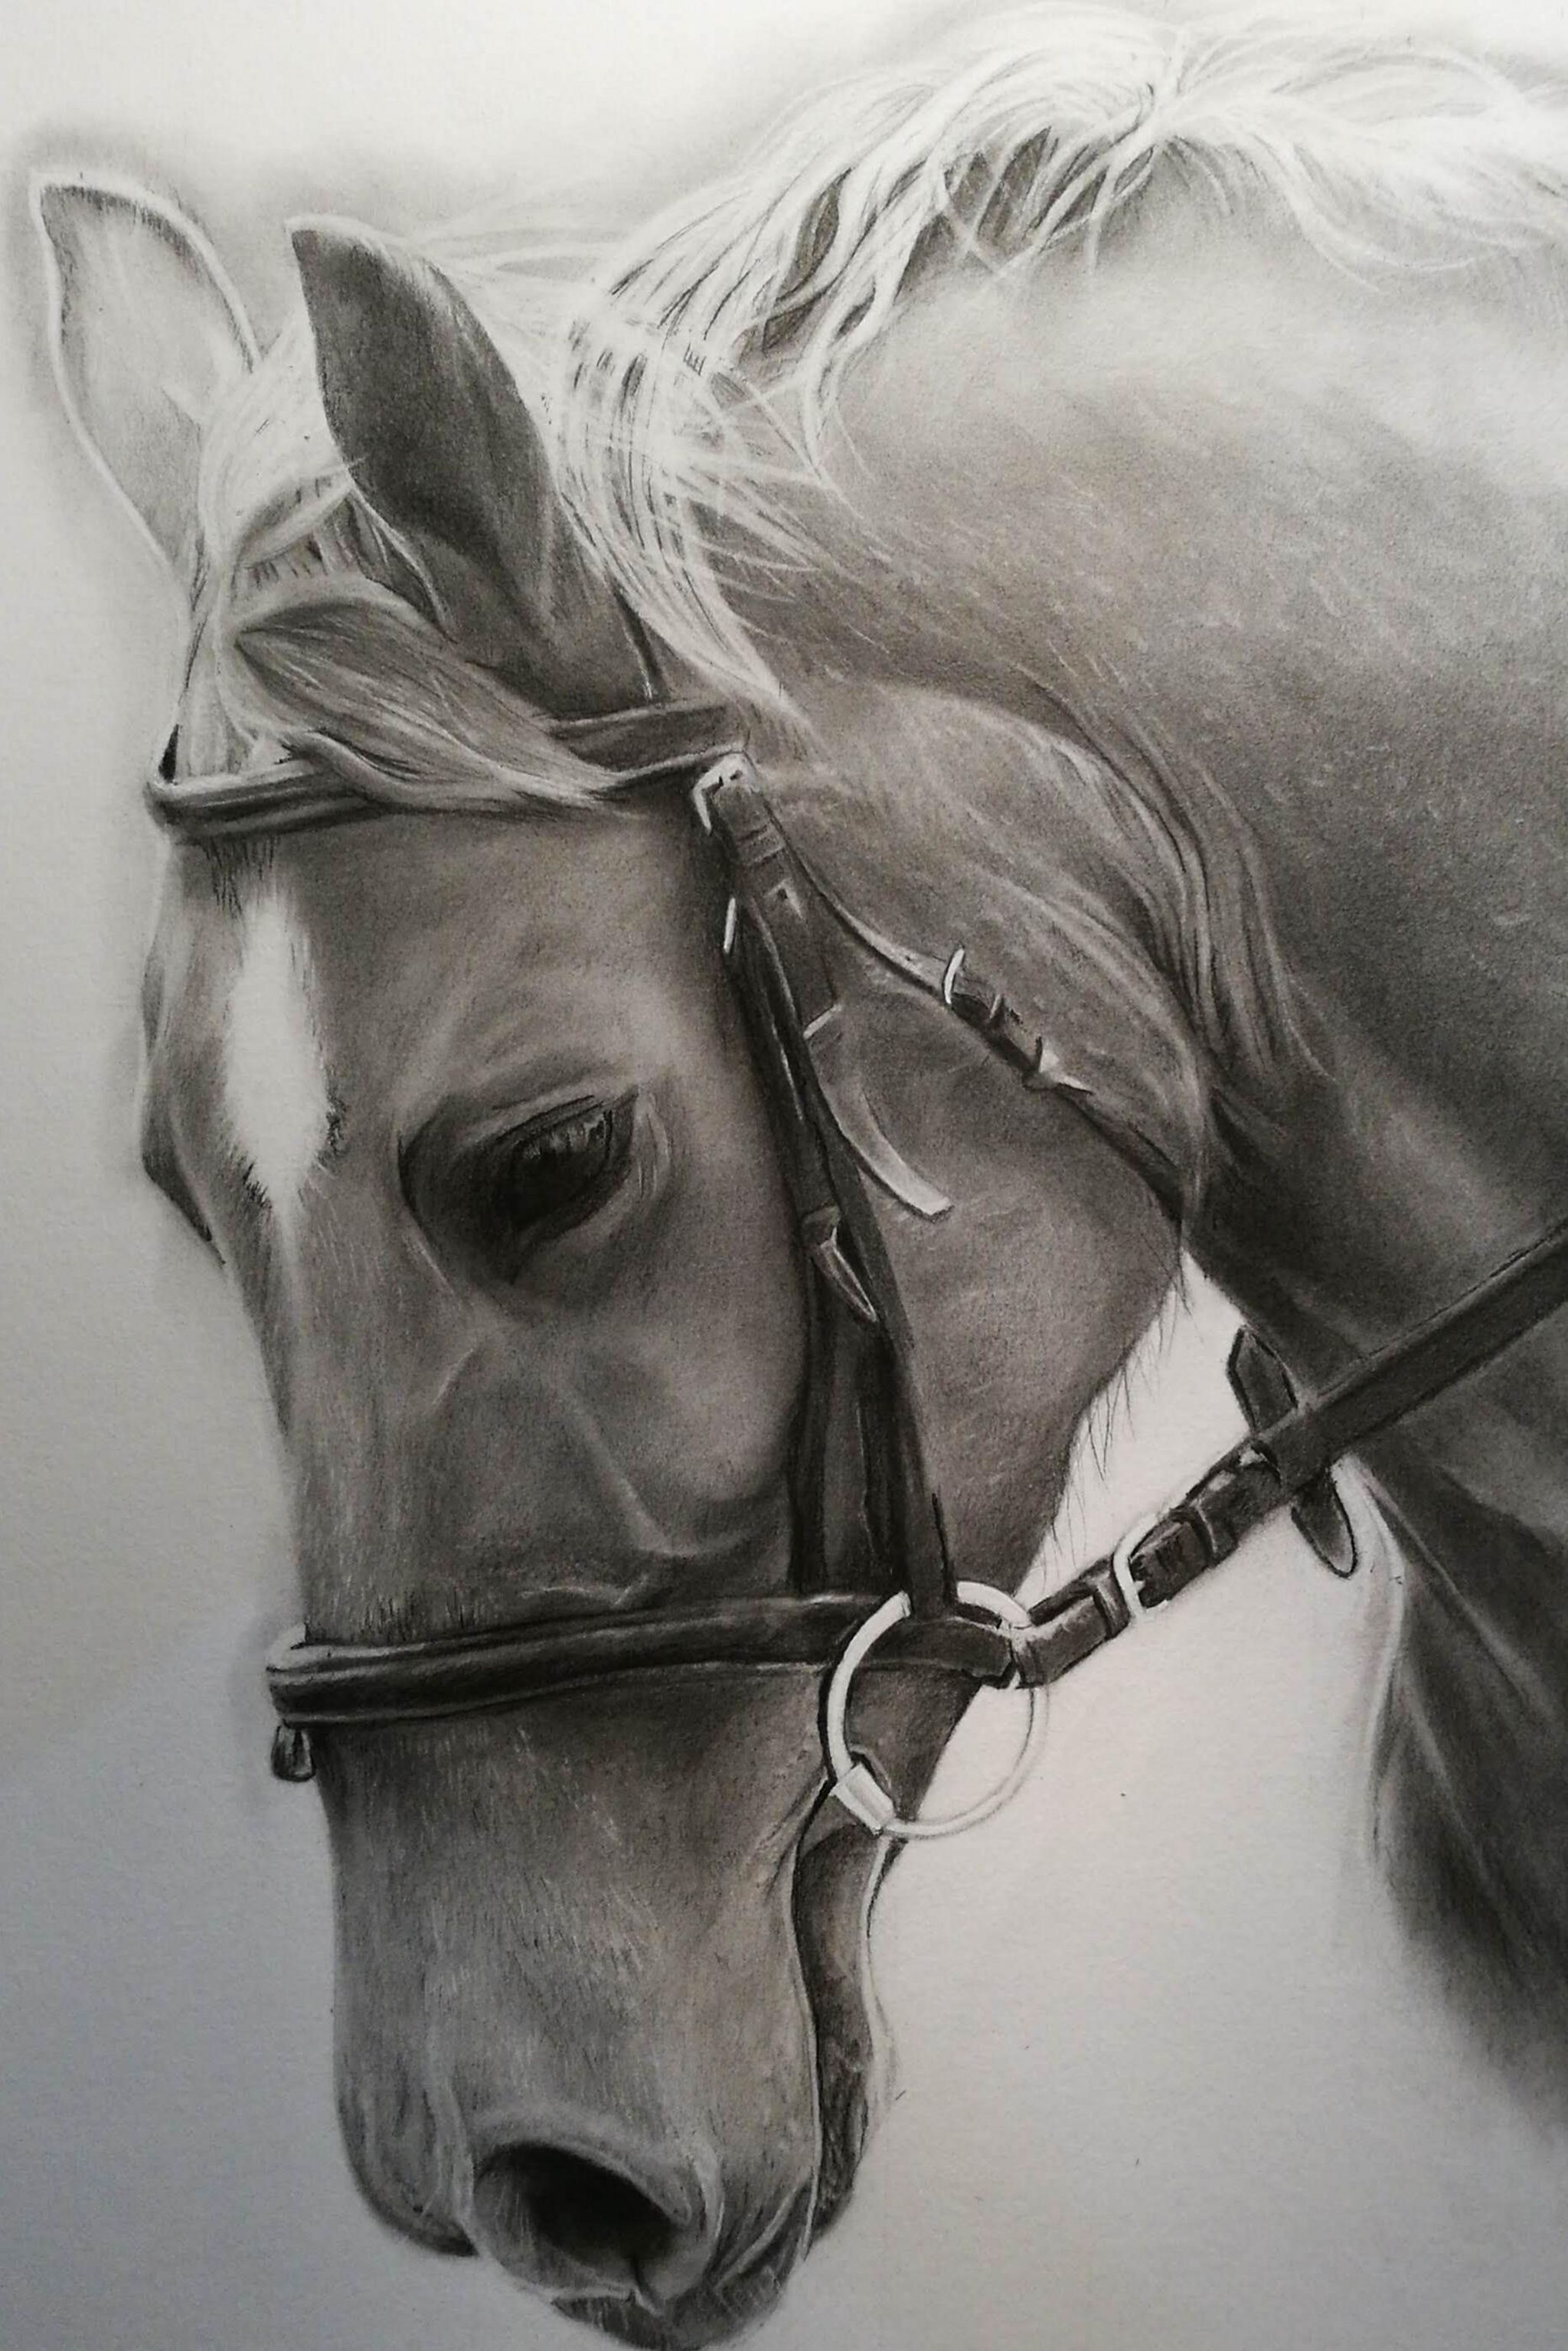 A photorealistic drawing of a horse